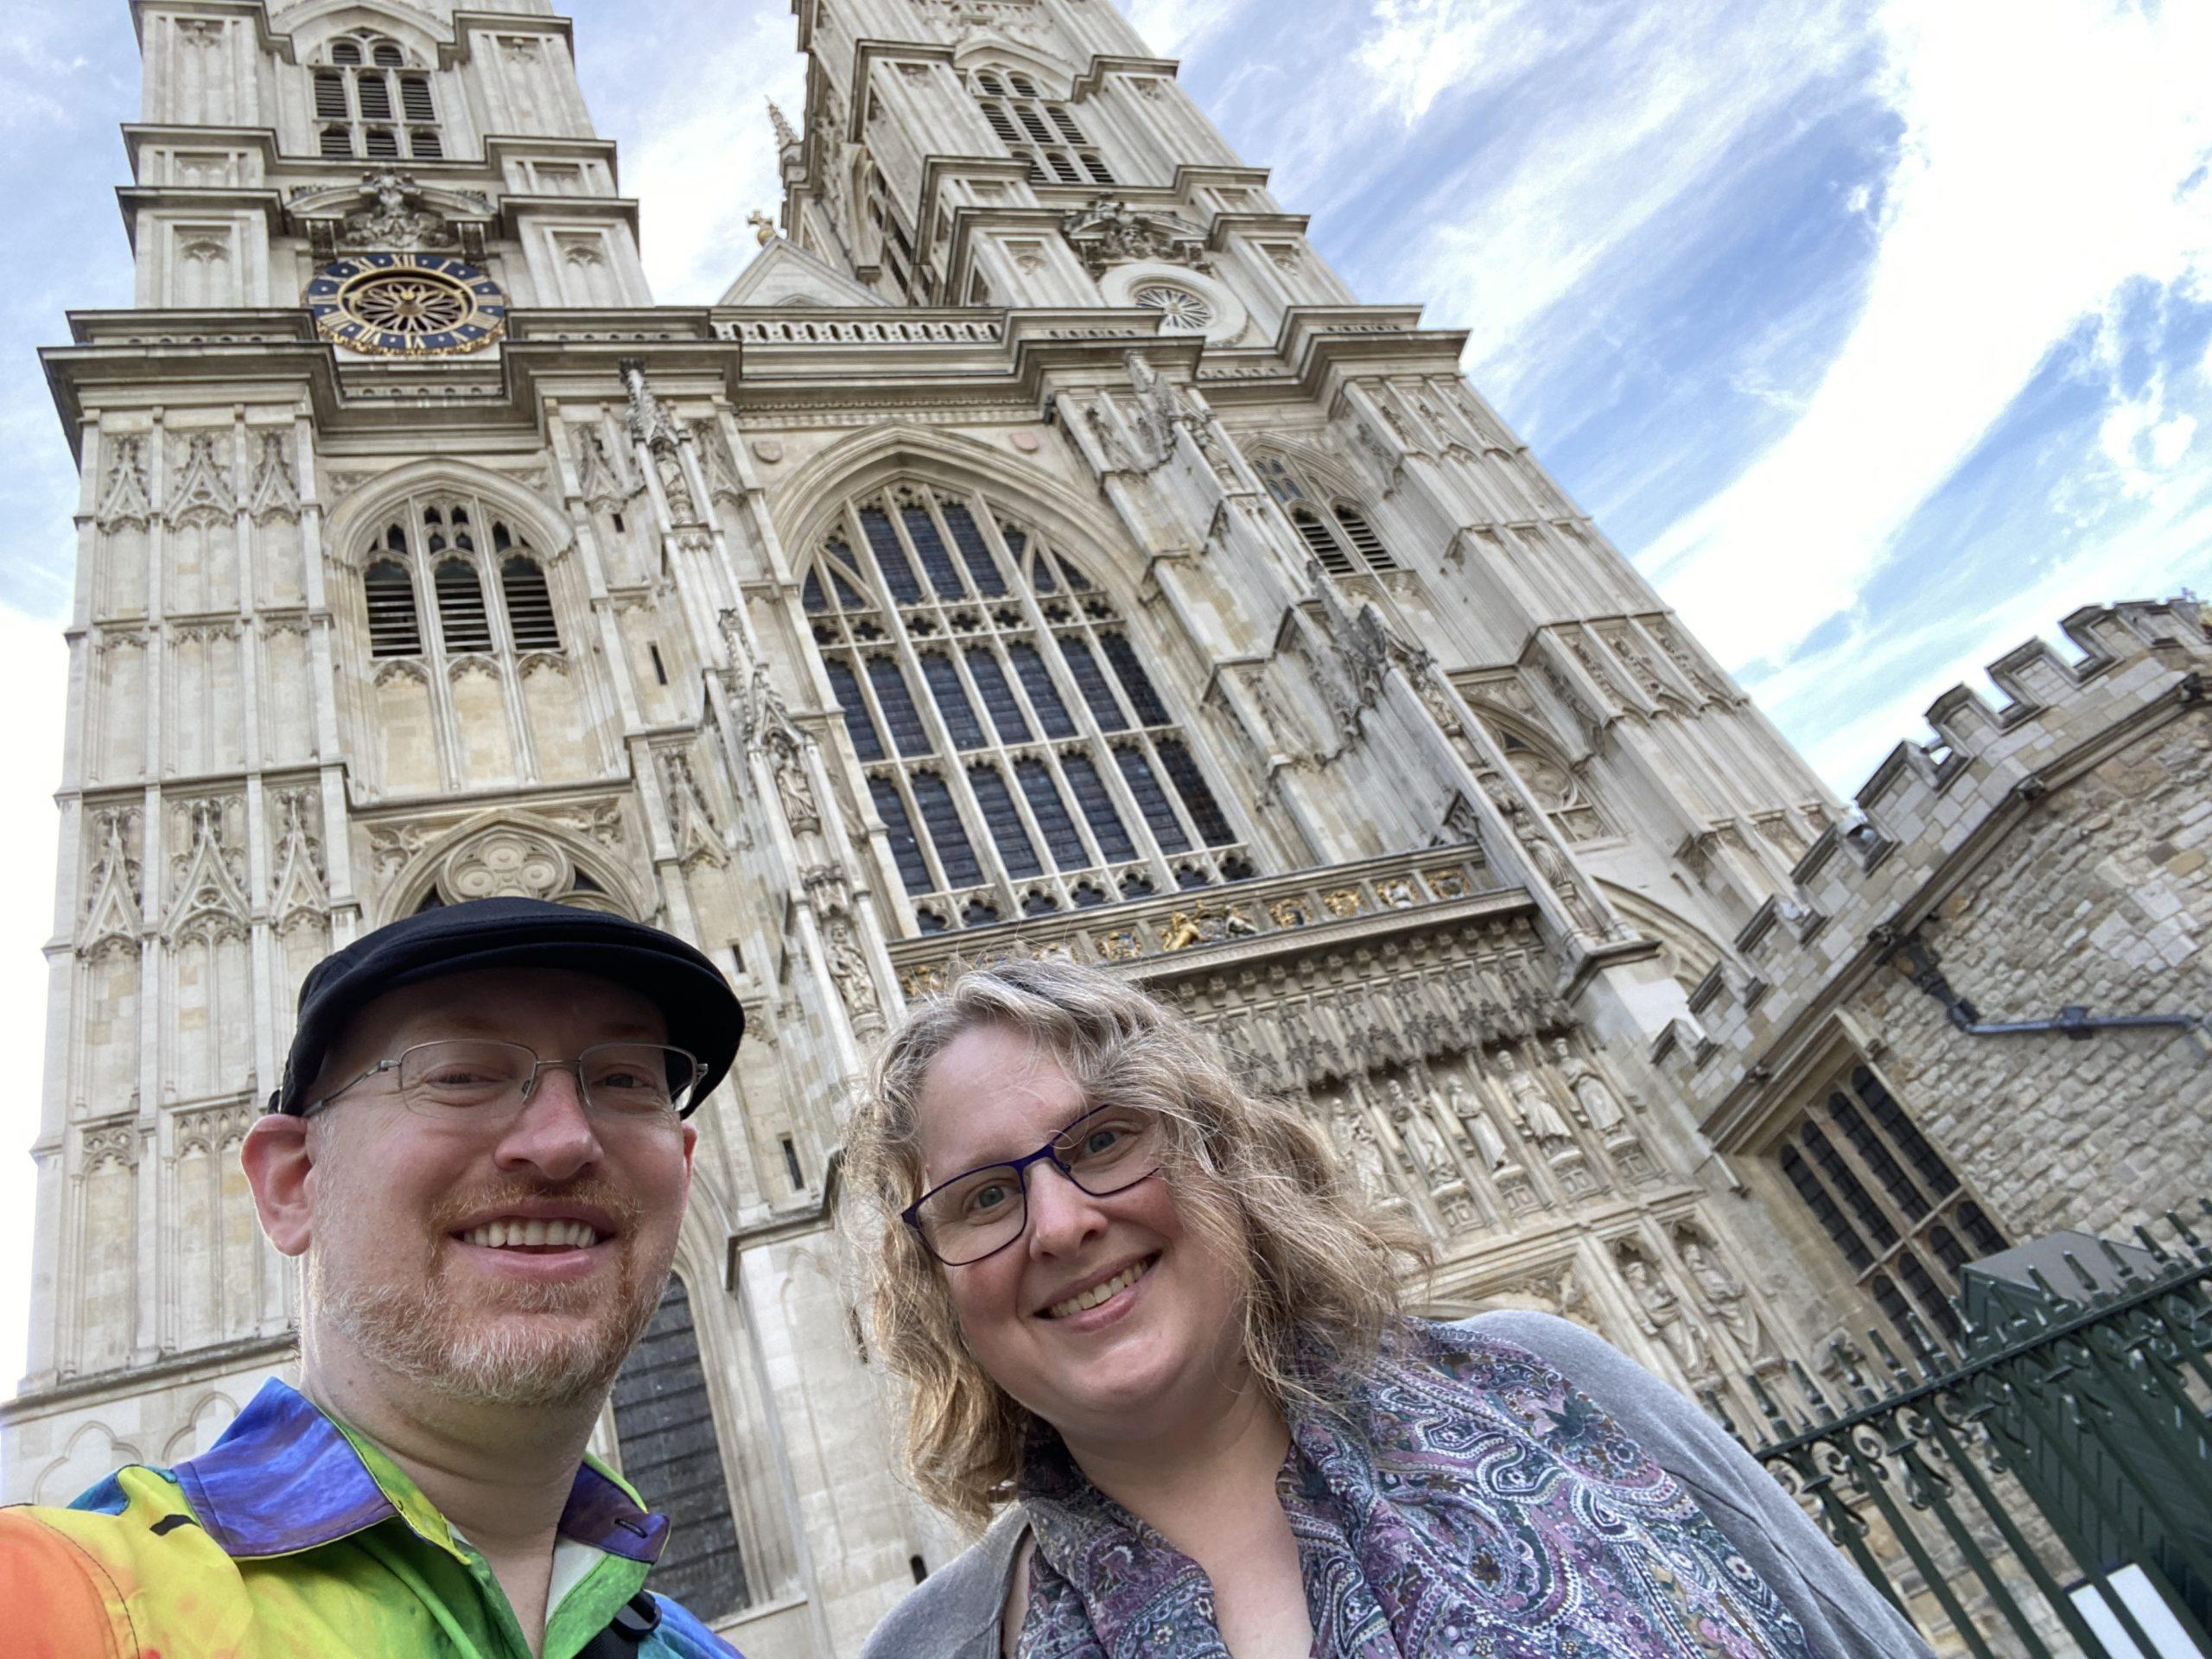 My wife and I outside Westminster Abbey.